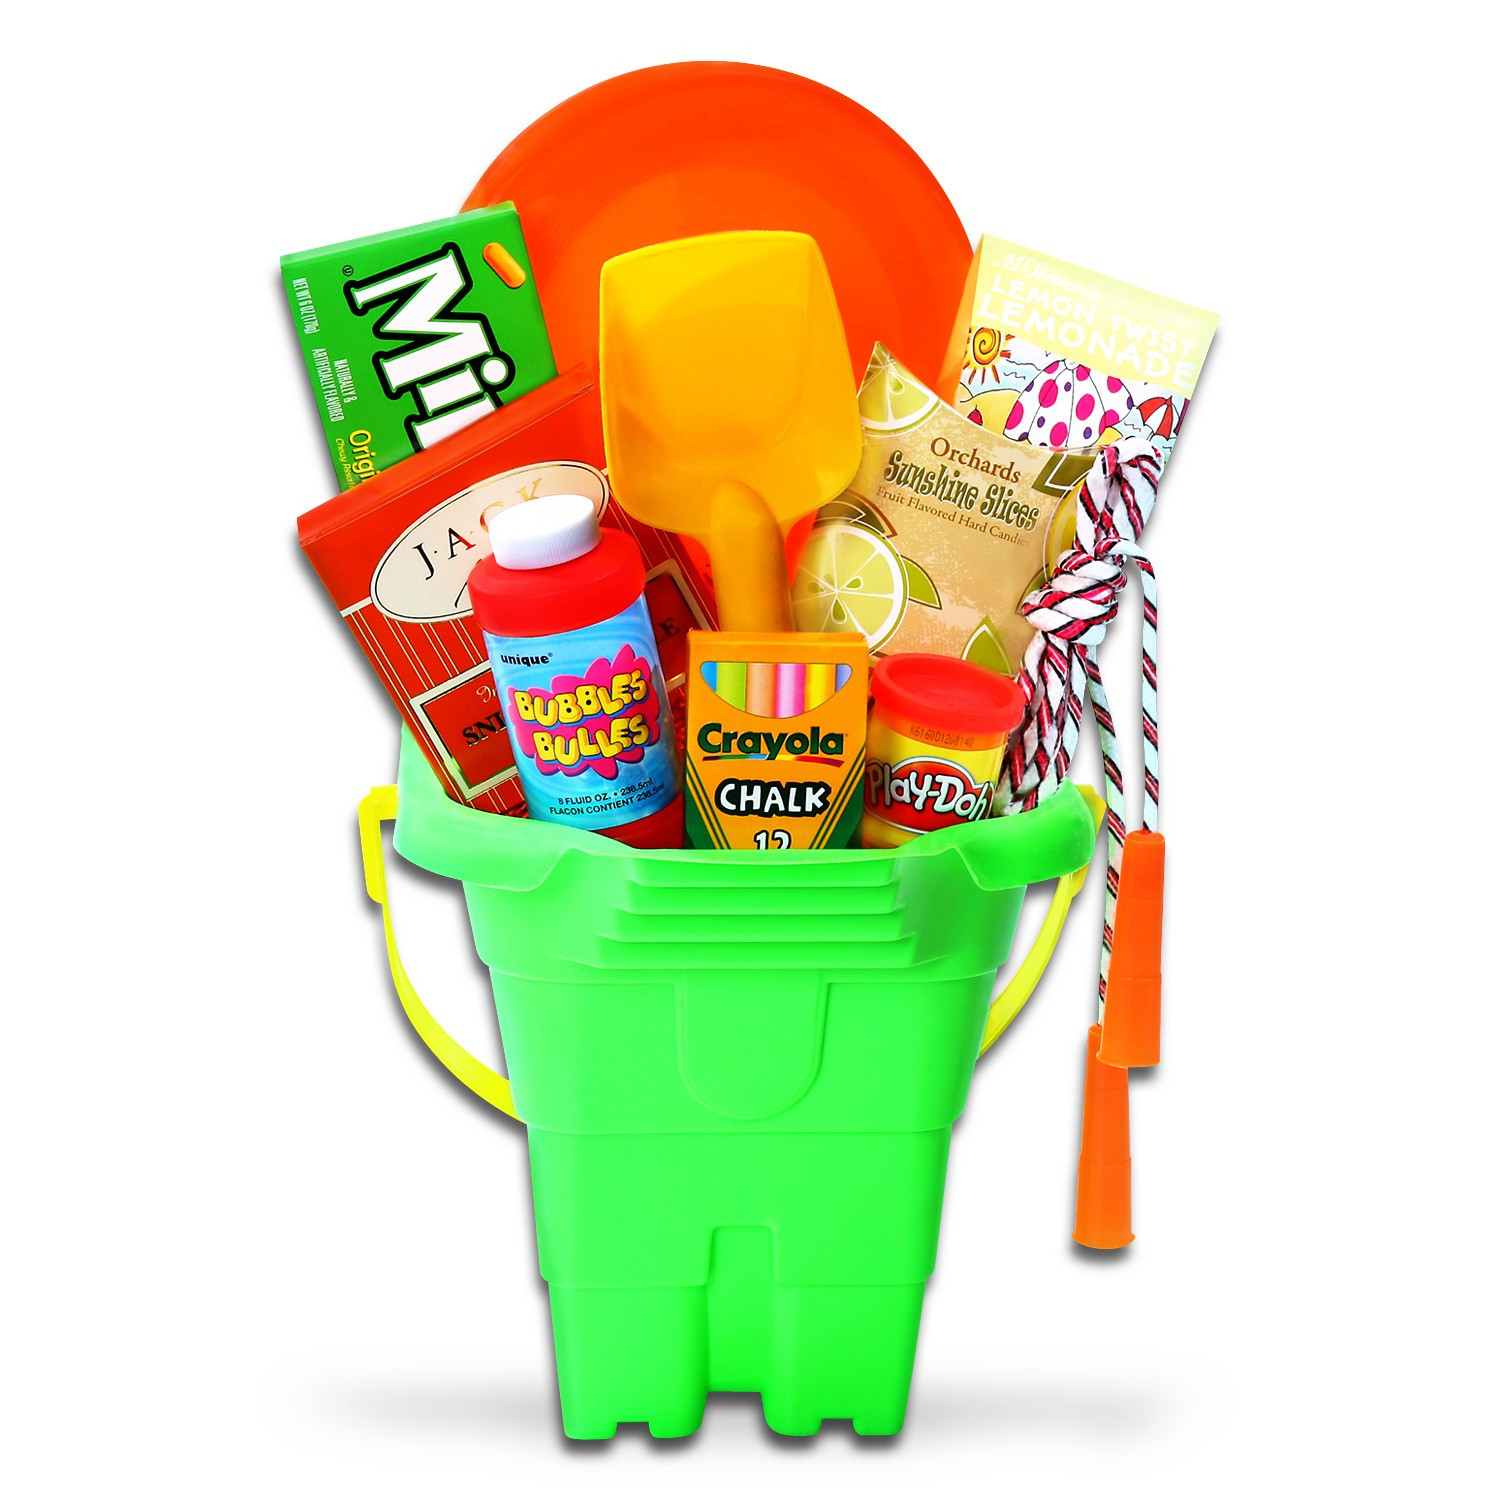 Fun In The Sun Gift Basket Ideas
 Custom Gift Baskets Pic The Gift Wholesale Personalization